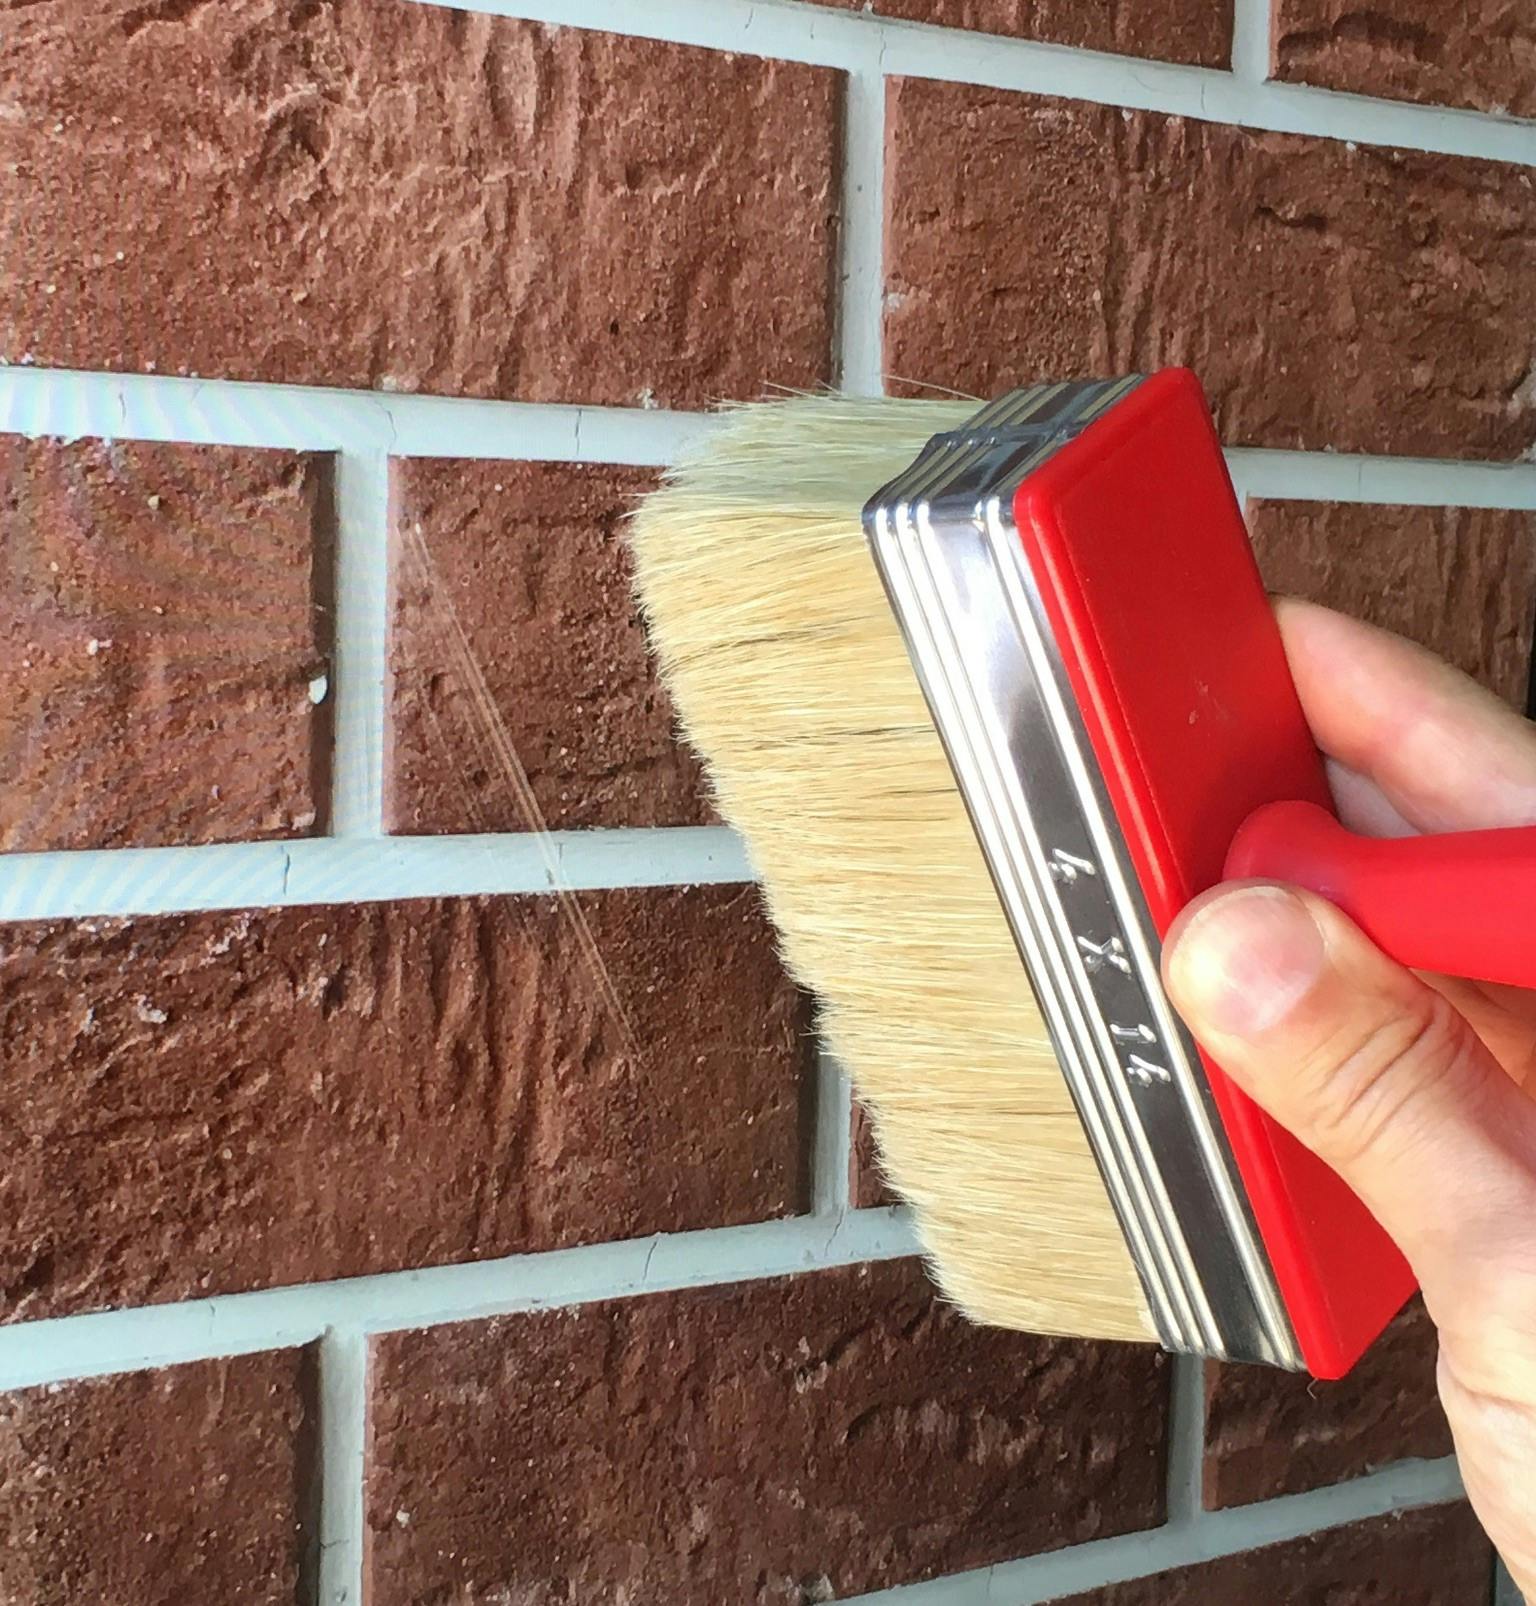 this is the right angle to hold the brush.